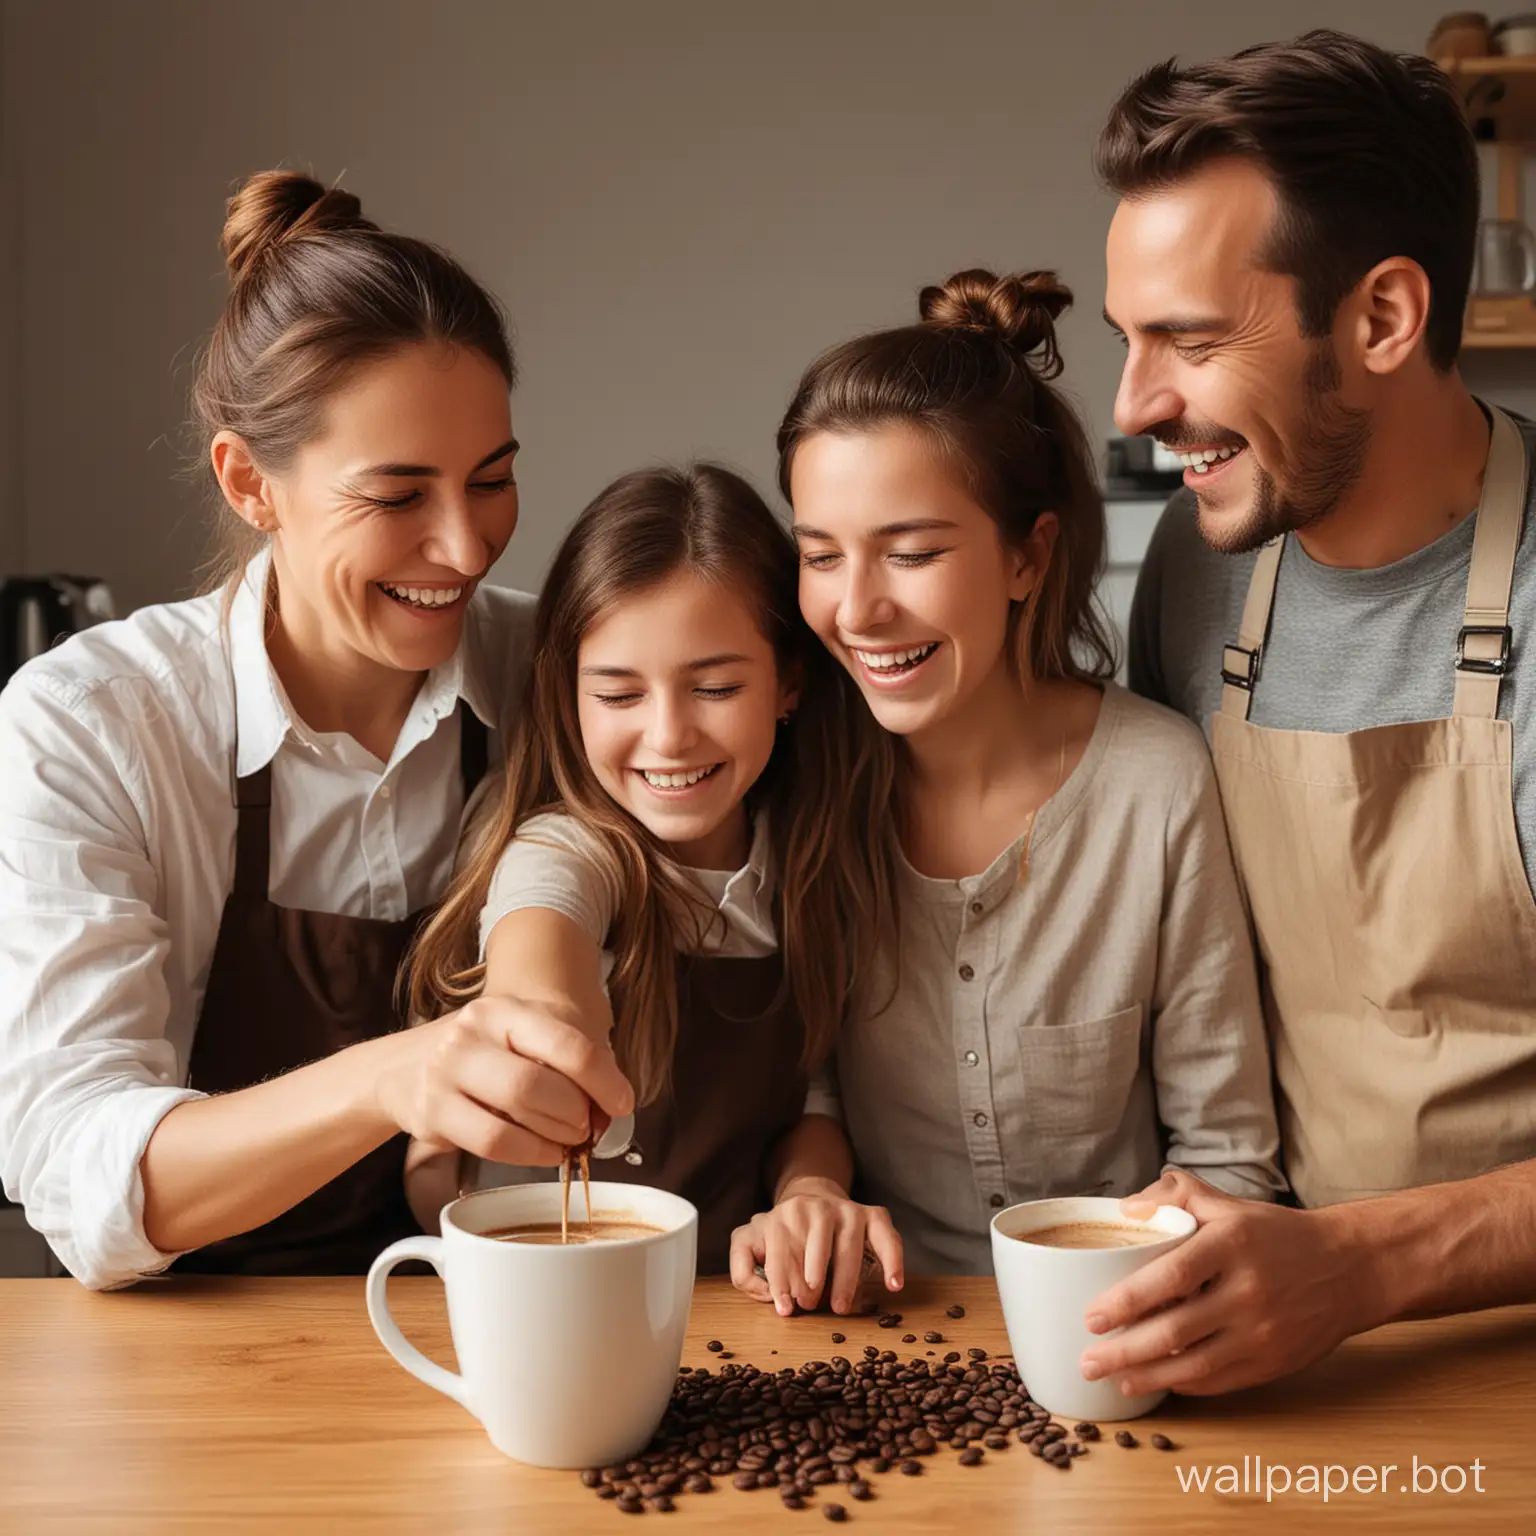 Joyful-Family-Brewing-Coffee-Together-at-Home